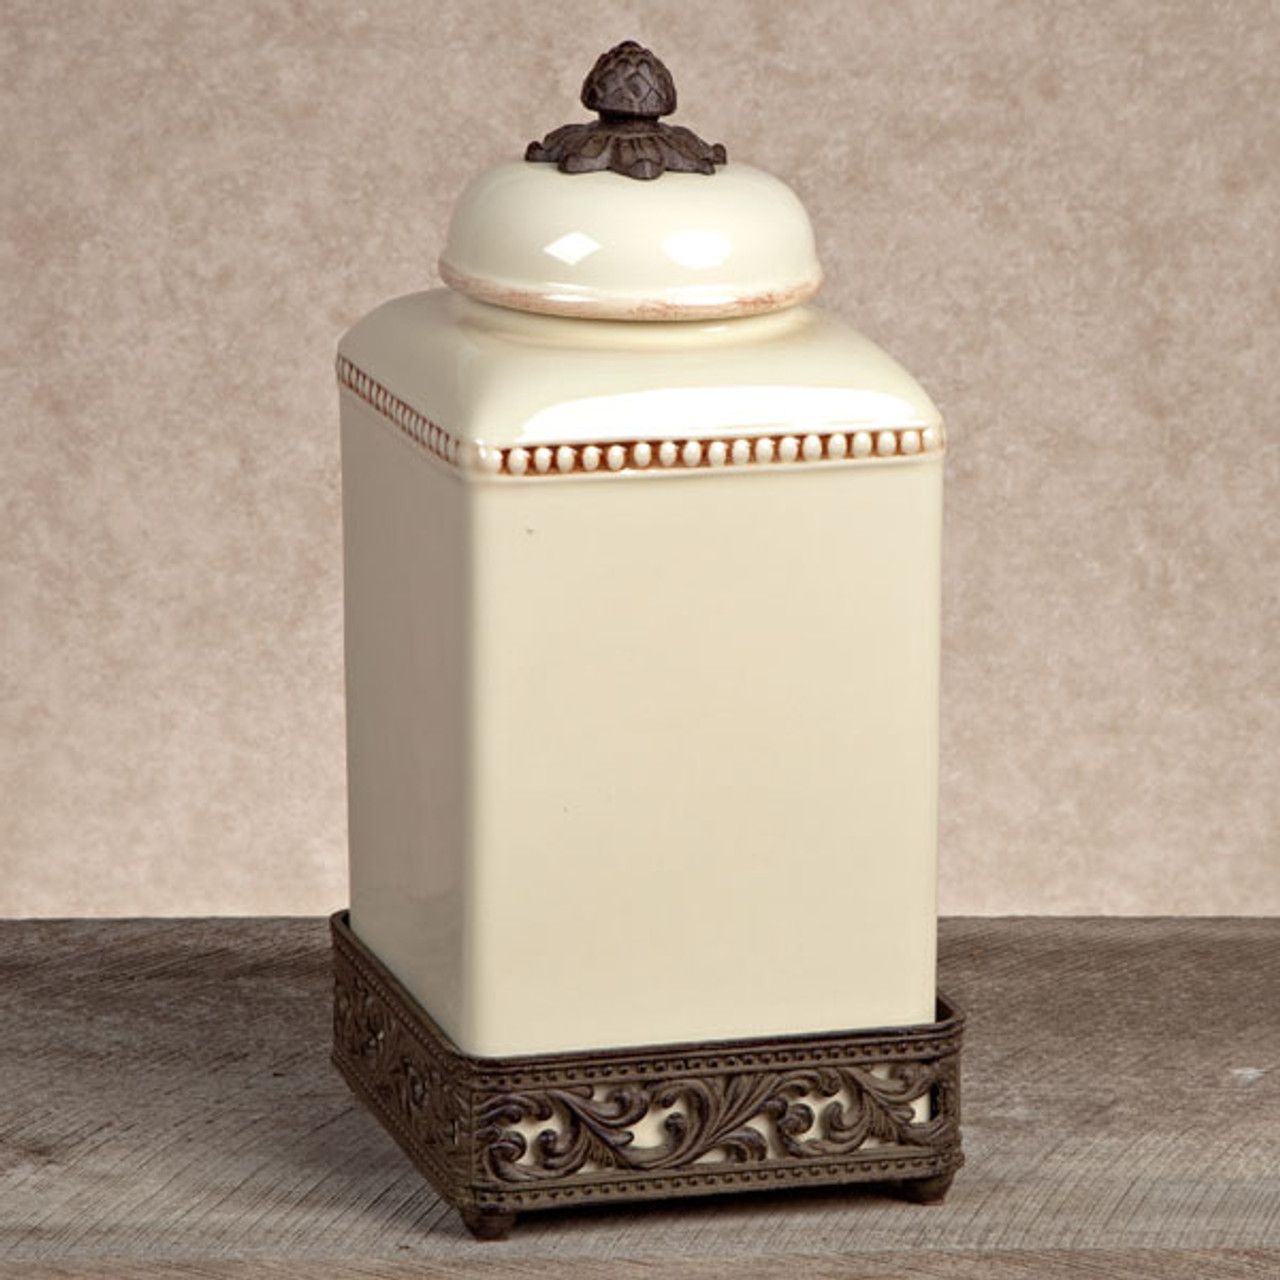 https://cdn11.bigcommerce.com/s-e0xlh4avpe/images/stencil/1280x1280/products/91407/119843/gg-collection-gracious-goods-large-cream-ceramic-canister-with-metal-base-26__38828.1650929404.jpg?c=1